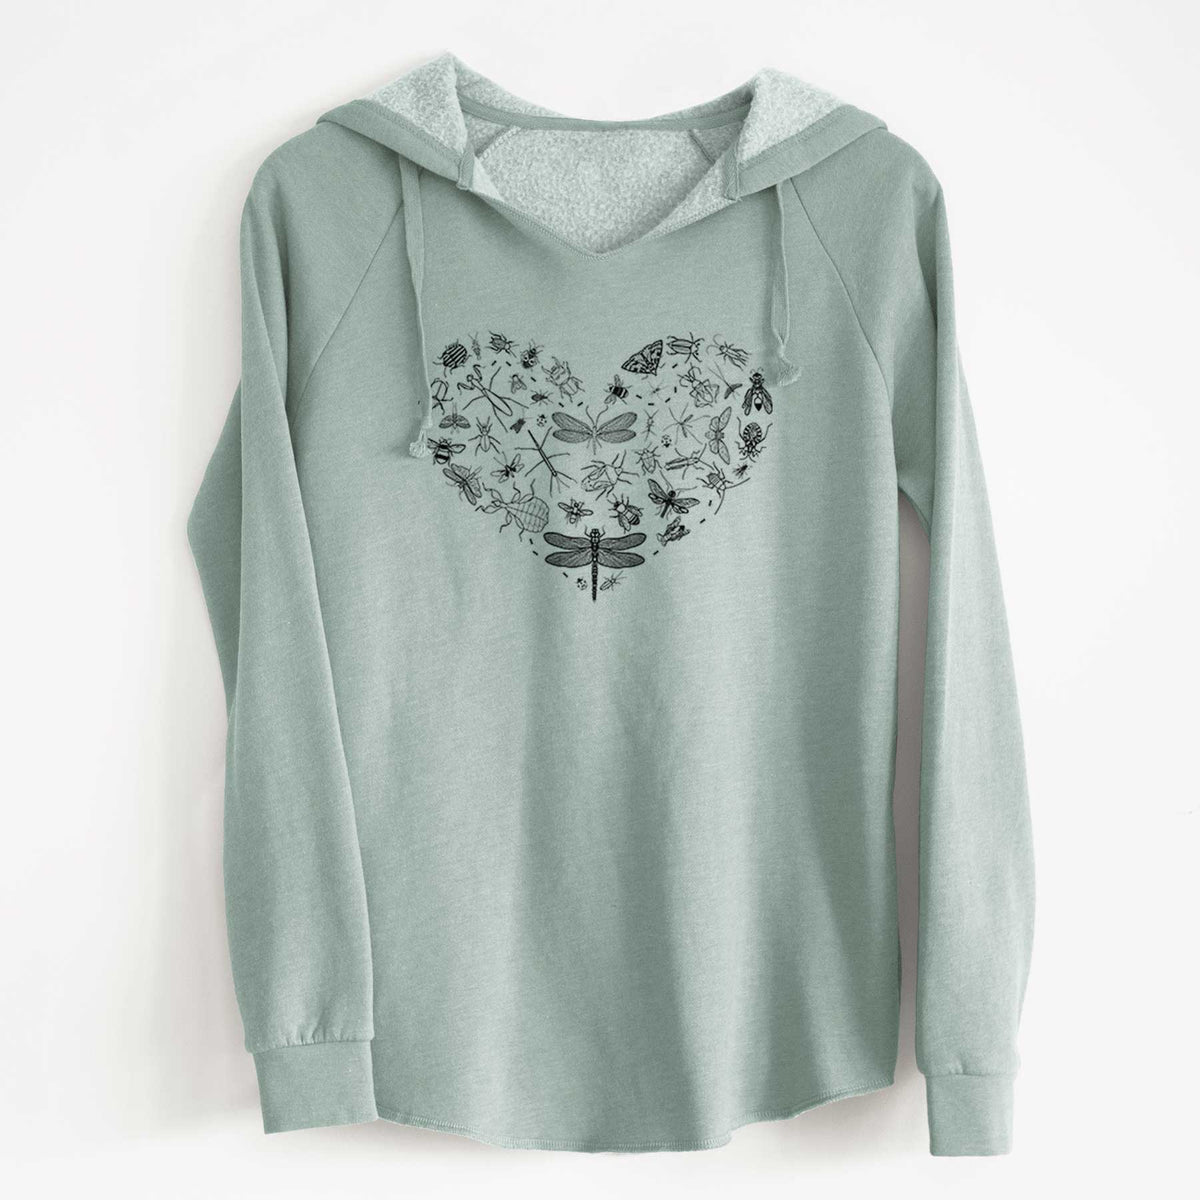 Heart Full of Insects - Cali Wave Hooded Sweatshirt